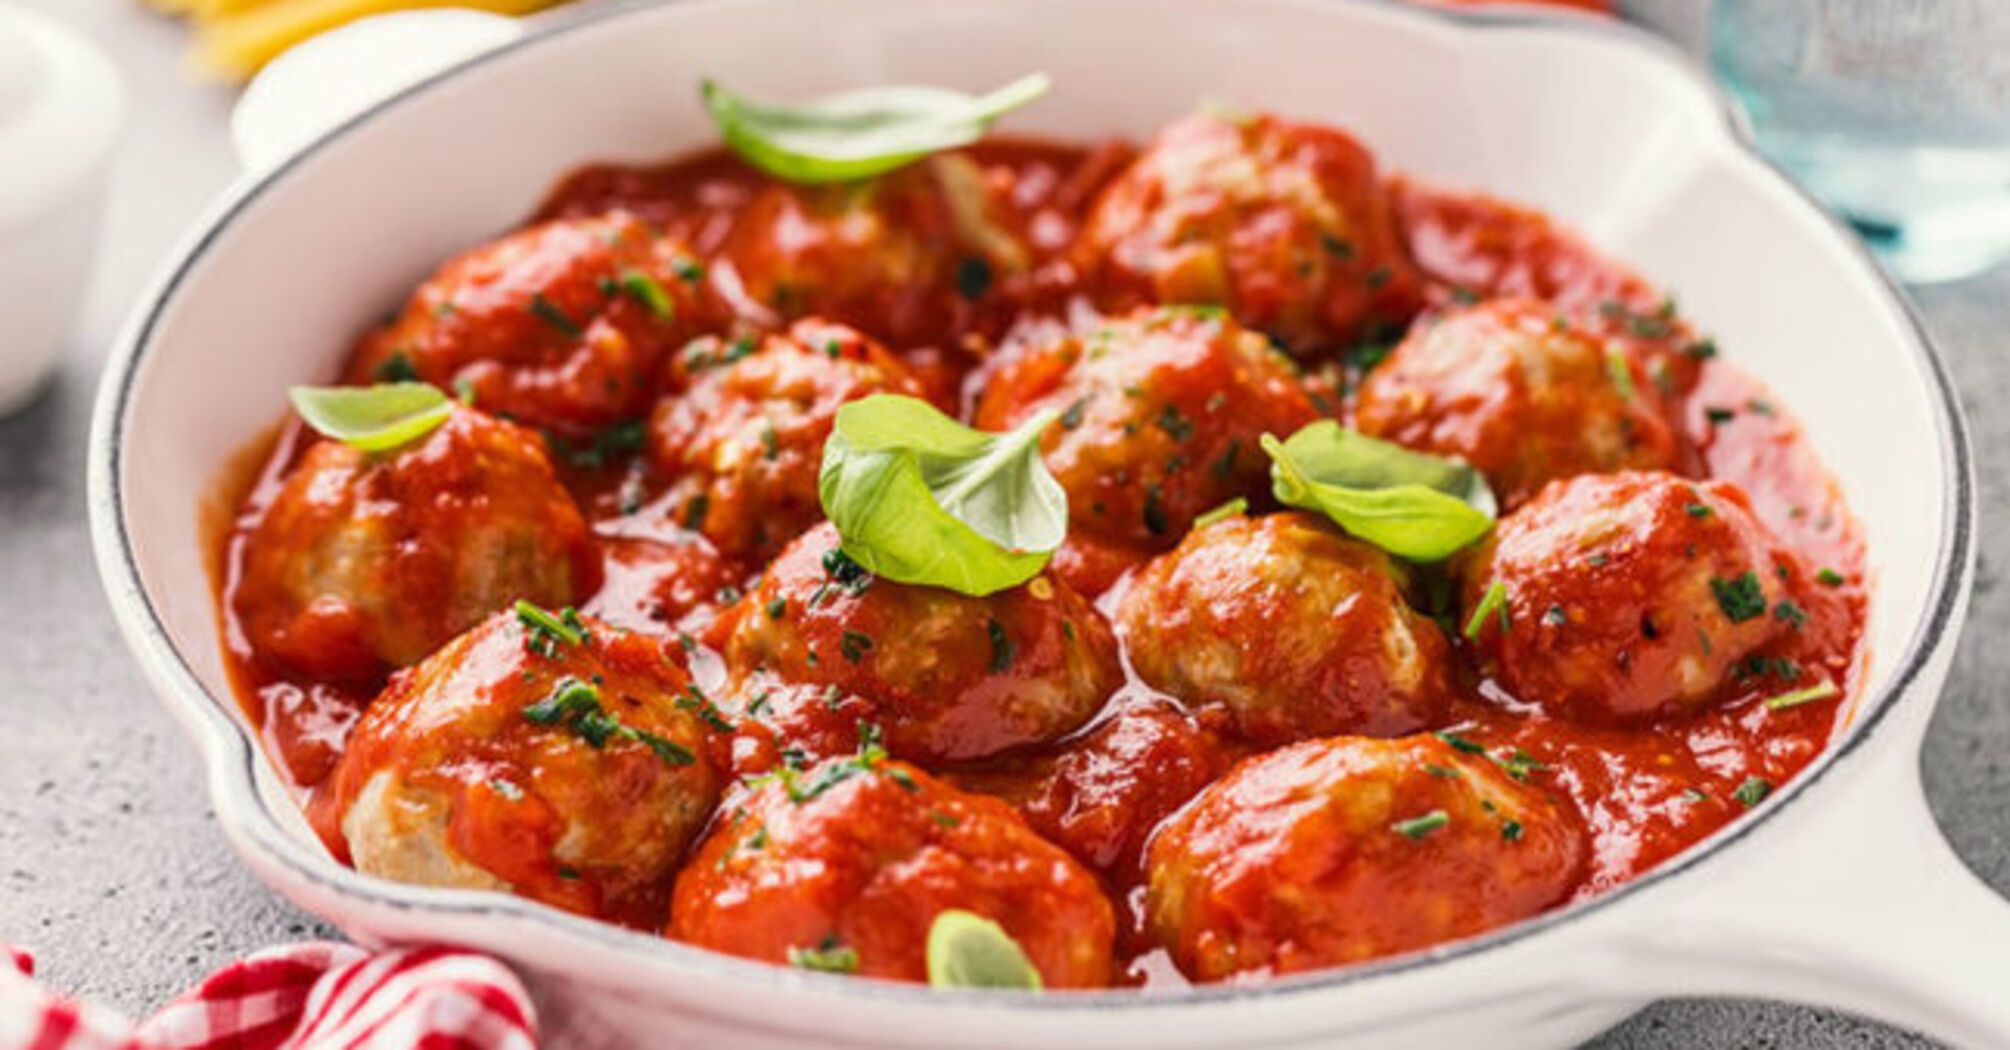 Meatballs with sauce: a recipe for dinner